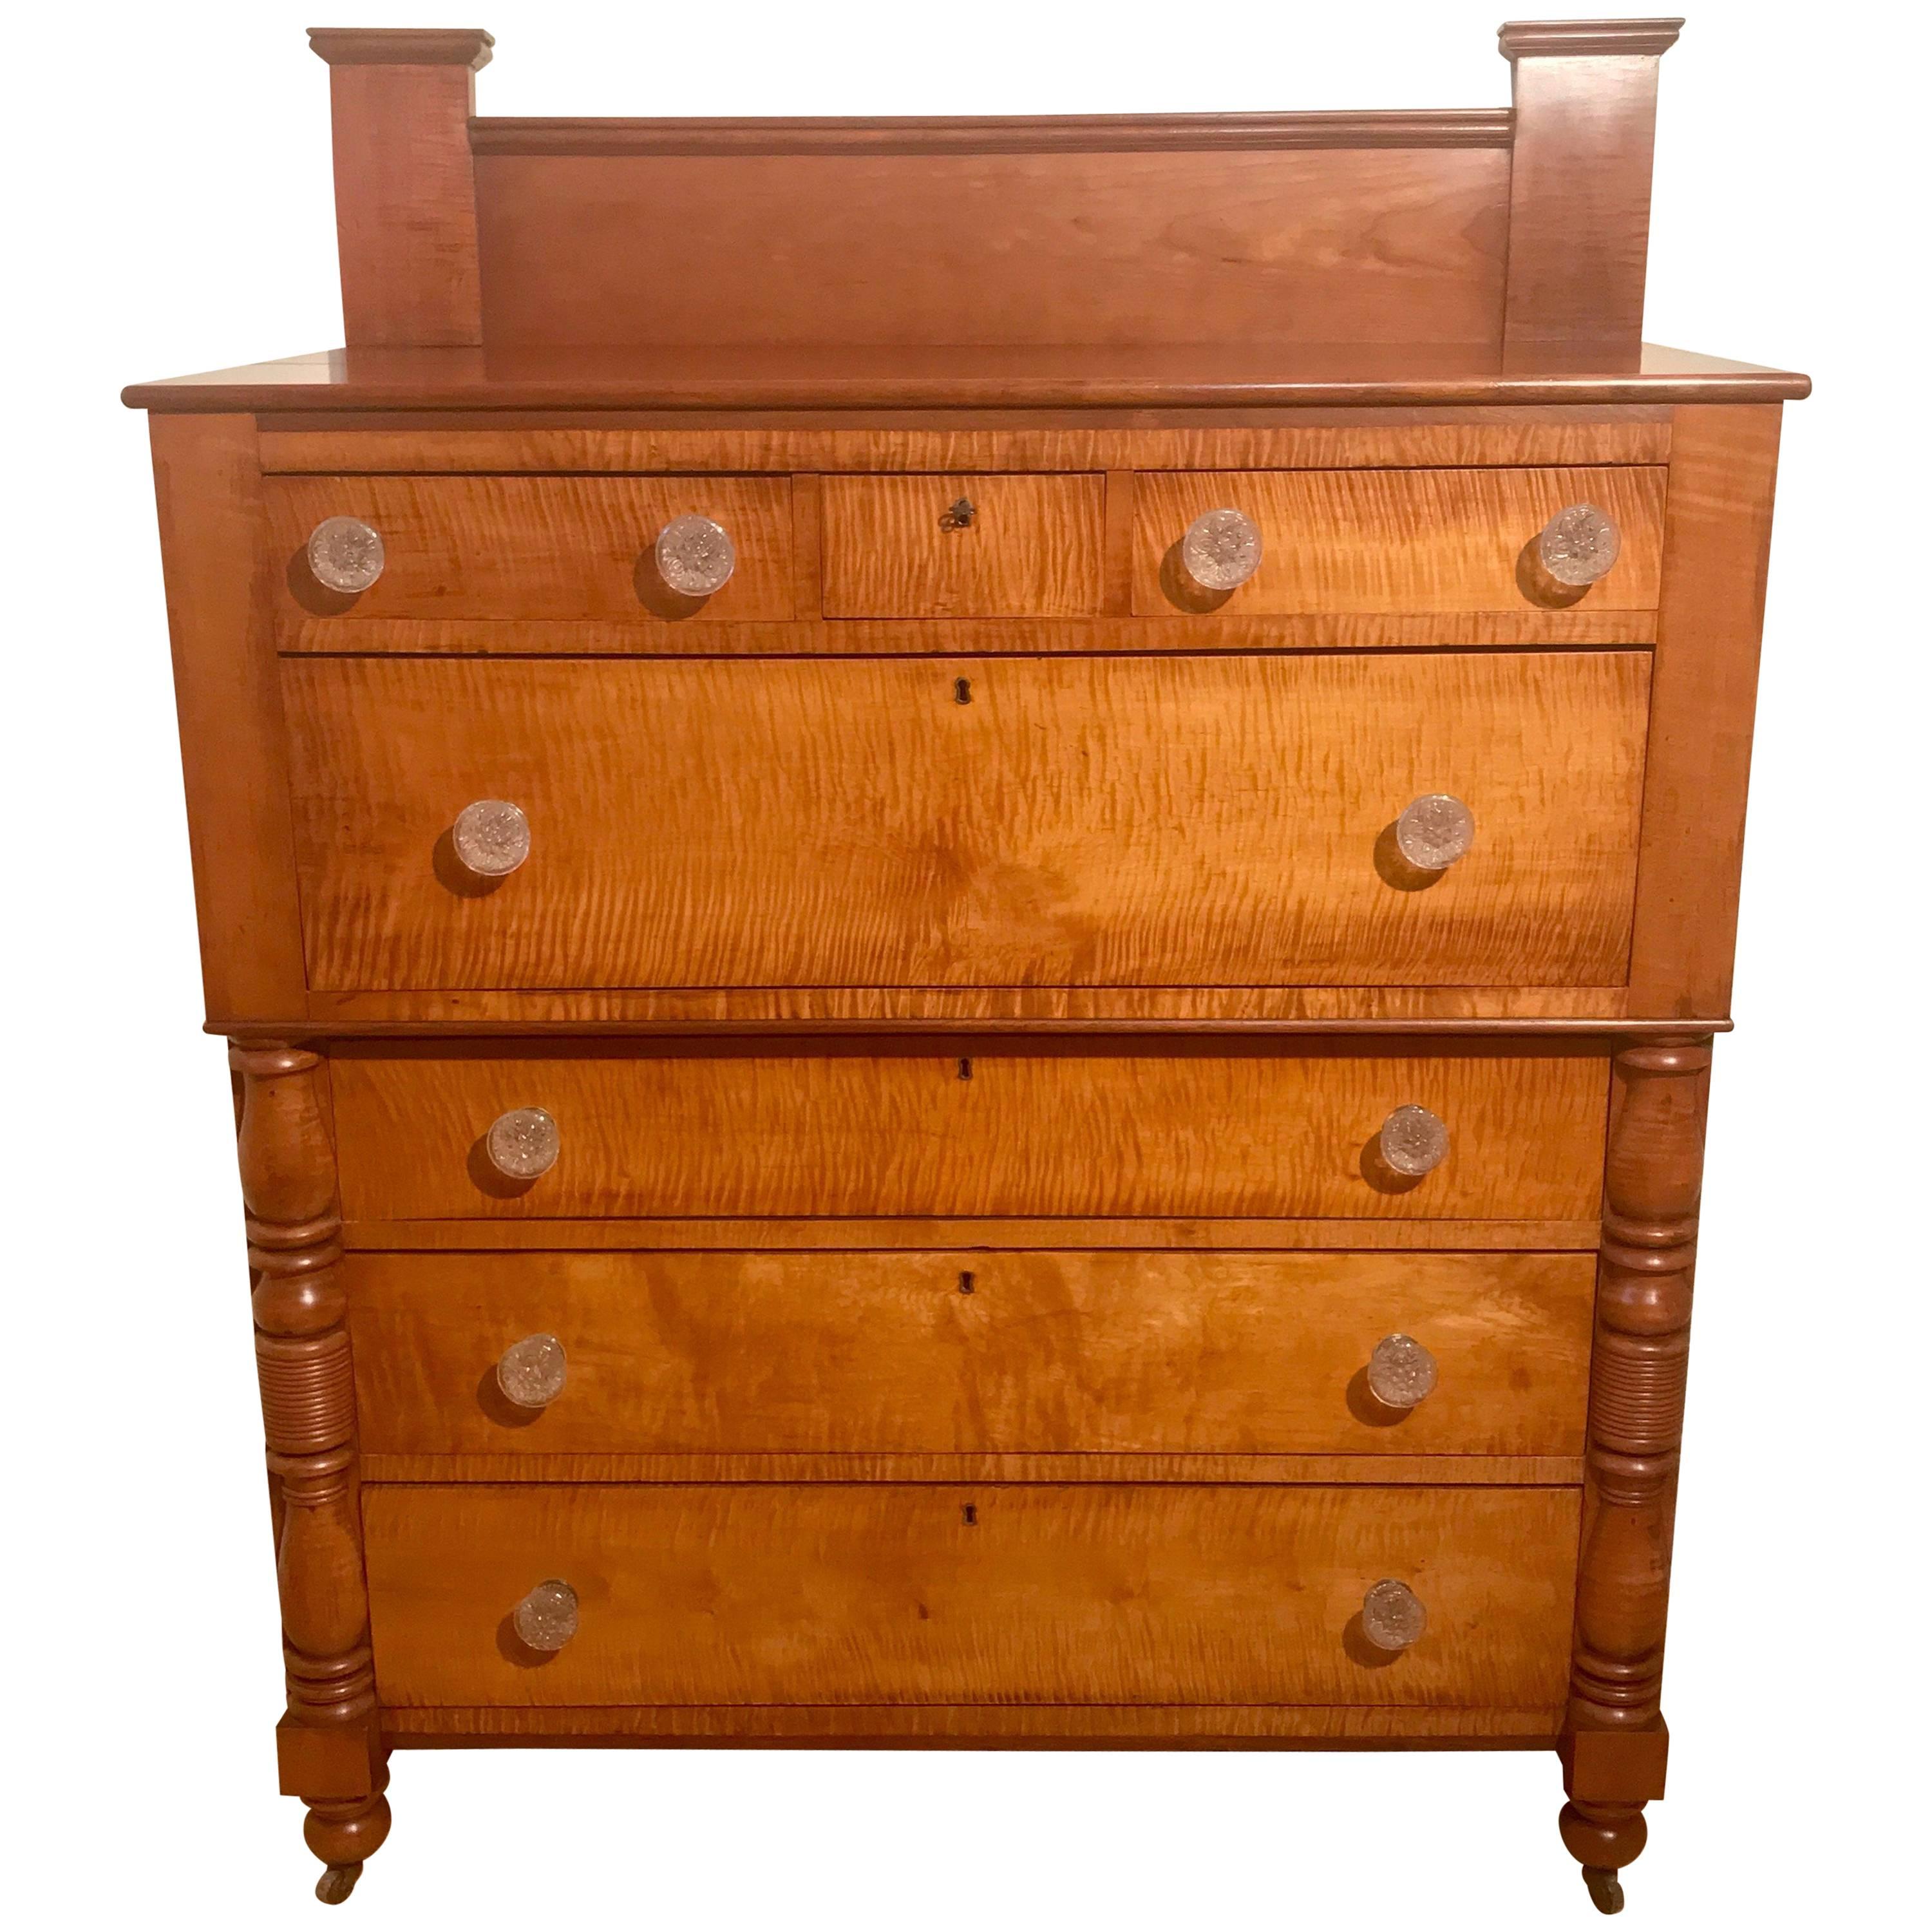 American Empire Chest of Drawers circa 1840 in Tiger Maple and Cherry im Angebot